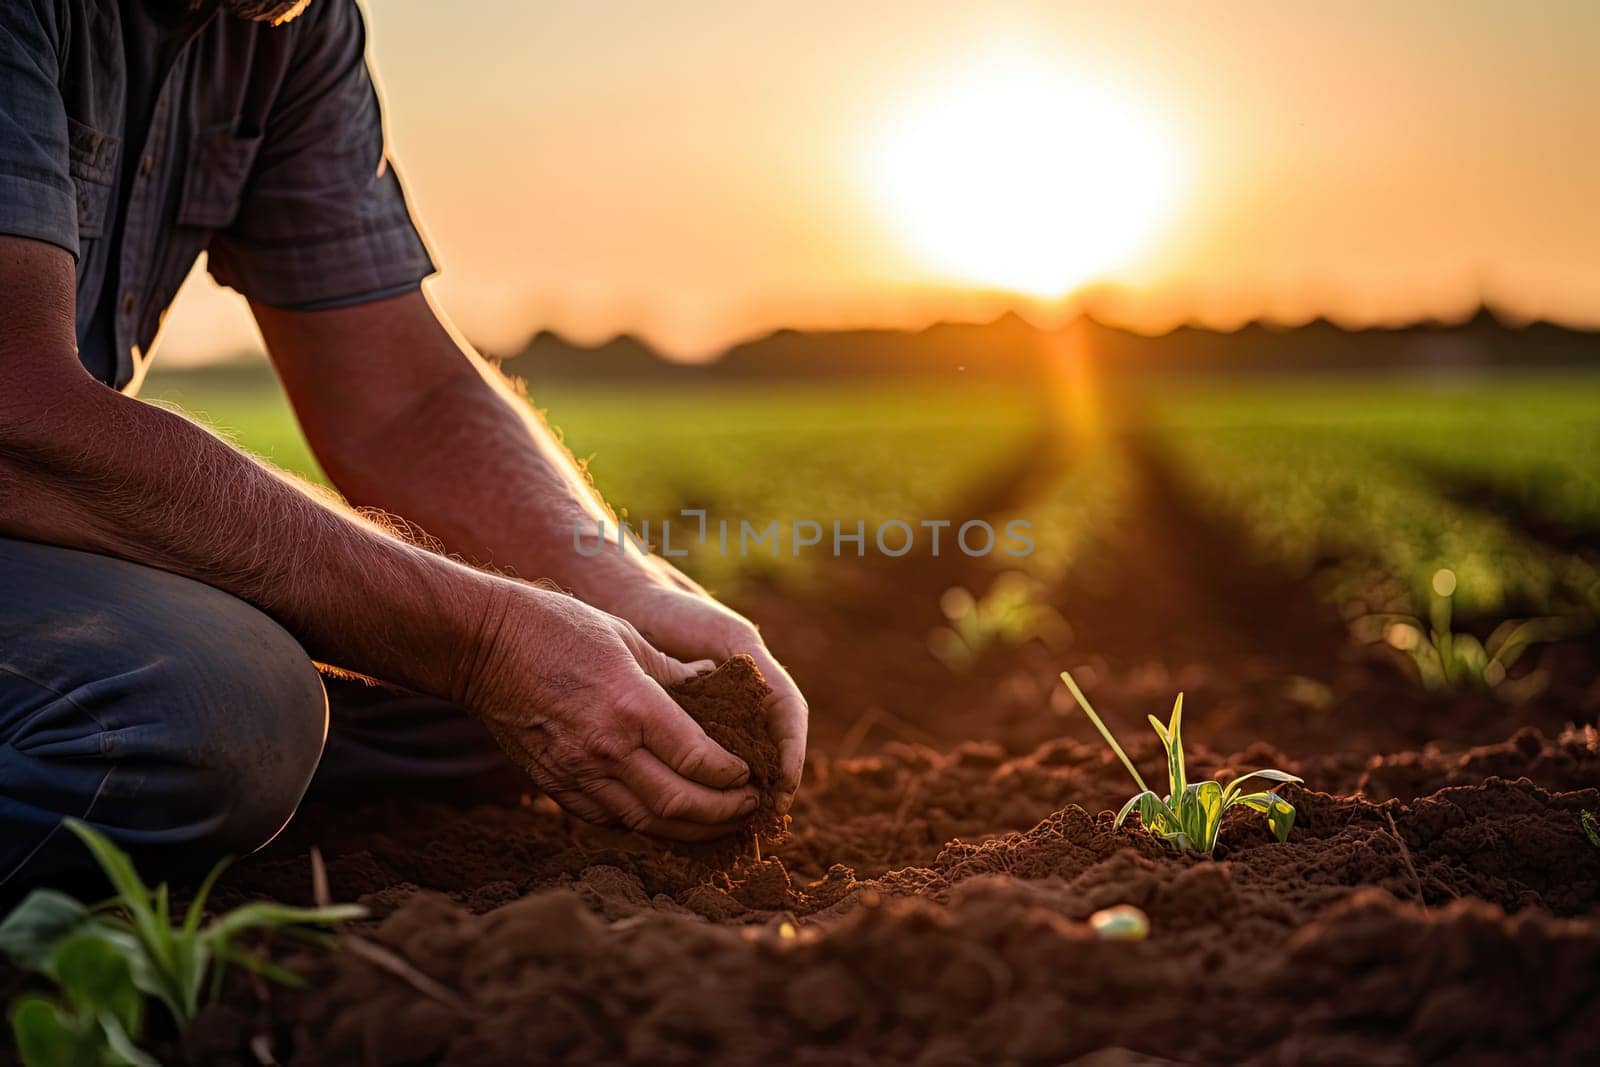 a man kneeling down in the ground to plant some crops at sunset time, with his hands resting on the ground